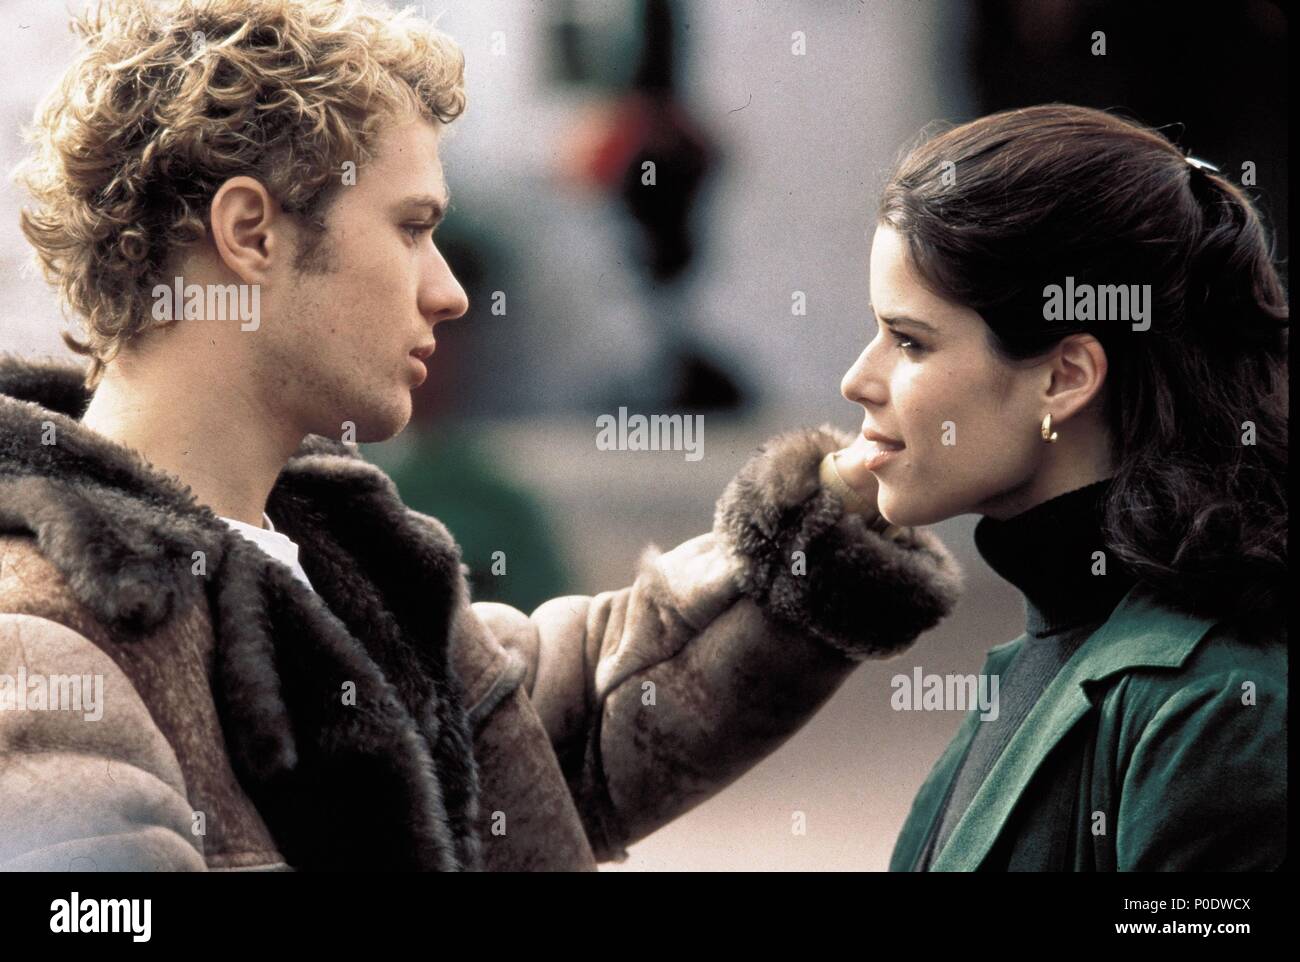 Original Film Title: I.  English Title: I.  Film Director: MARC CHRISTOPHER.  Year: 1998.  Stars: NEVE CAMPBELL; RYAN PHILLIPPE. Copyright: Editorial inside use only. This is a publicly distributed handout. Access rights only, no license of copyright provided. Mandatory authorization to Visual Icon (www.visual-icon.com) is required for the reproduction of this image. Credit: MIRAMAX / HAYES, KERRY / Album Stock Photo